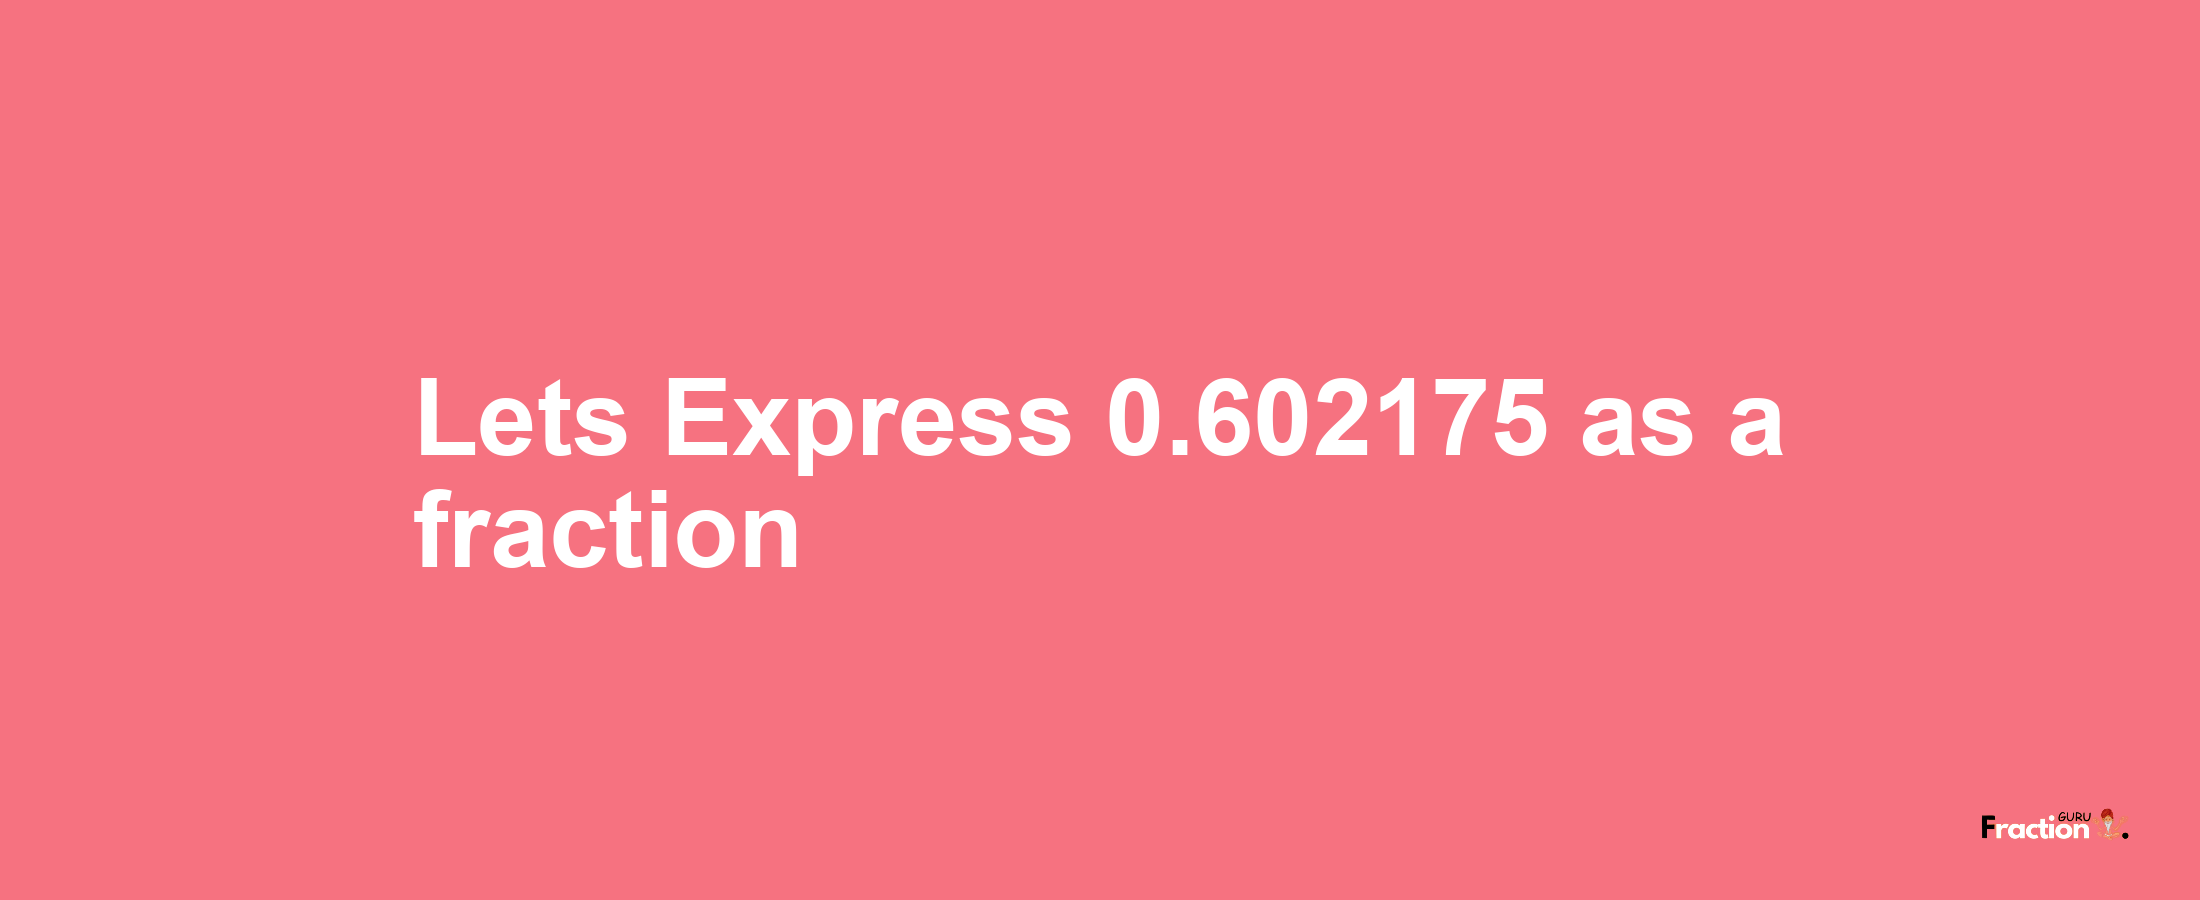 Lets Express 0.602175 as afraction